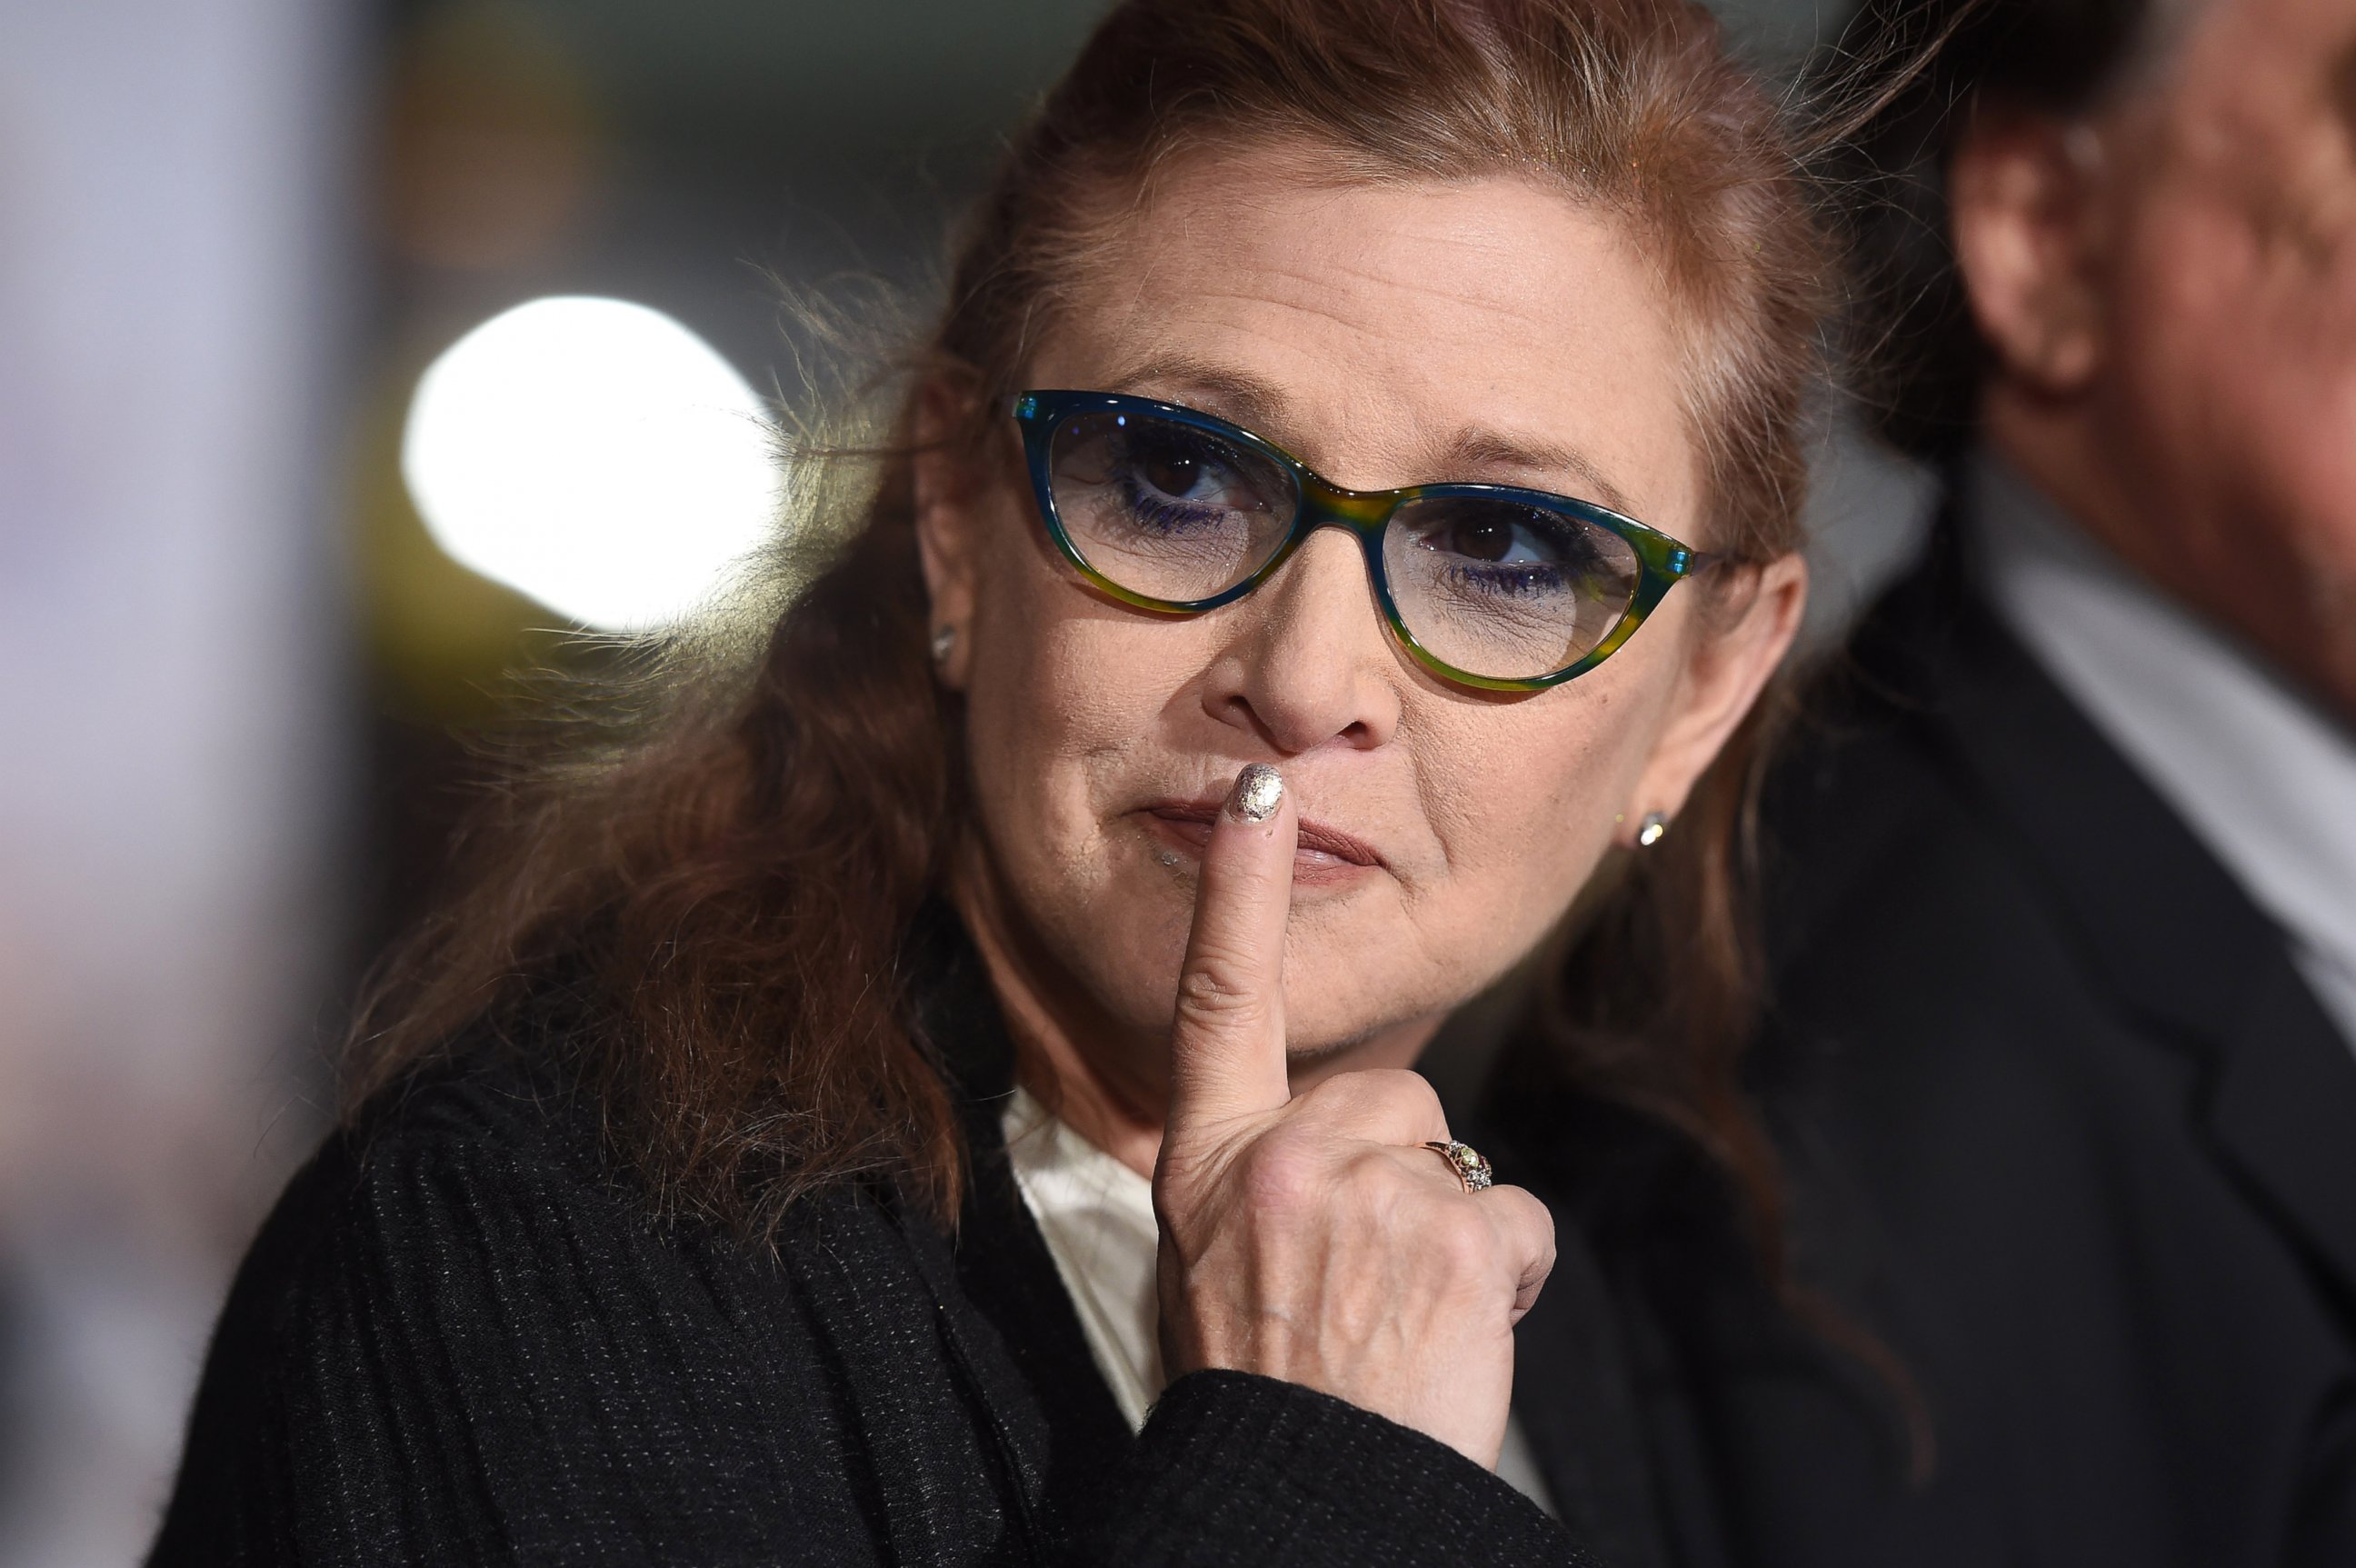 PHOTO: Carrie Fisher arrives at a movie premiere on Nov. 3, 2014 in Westwood, Calif.